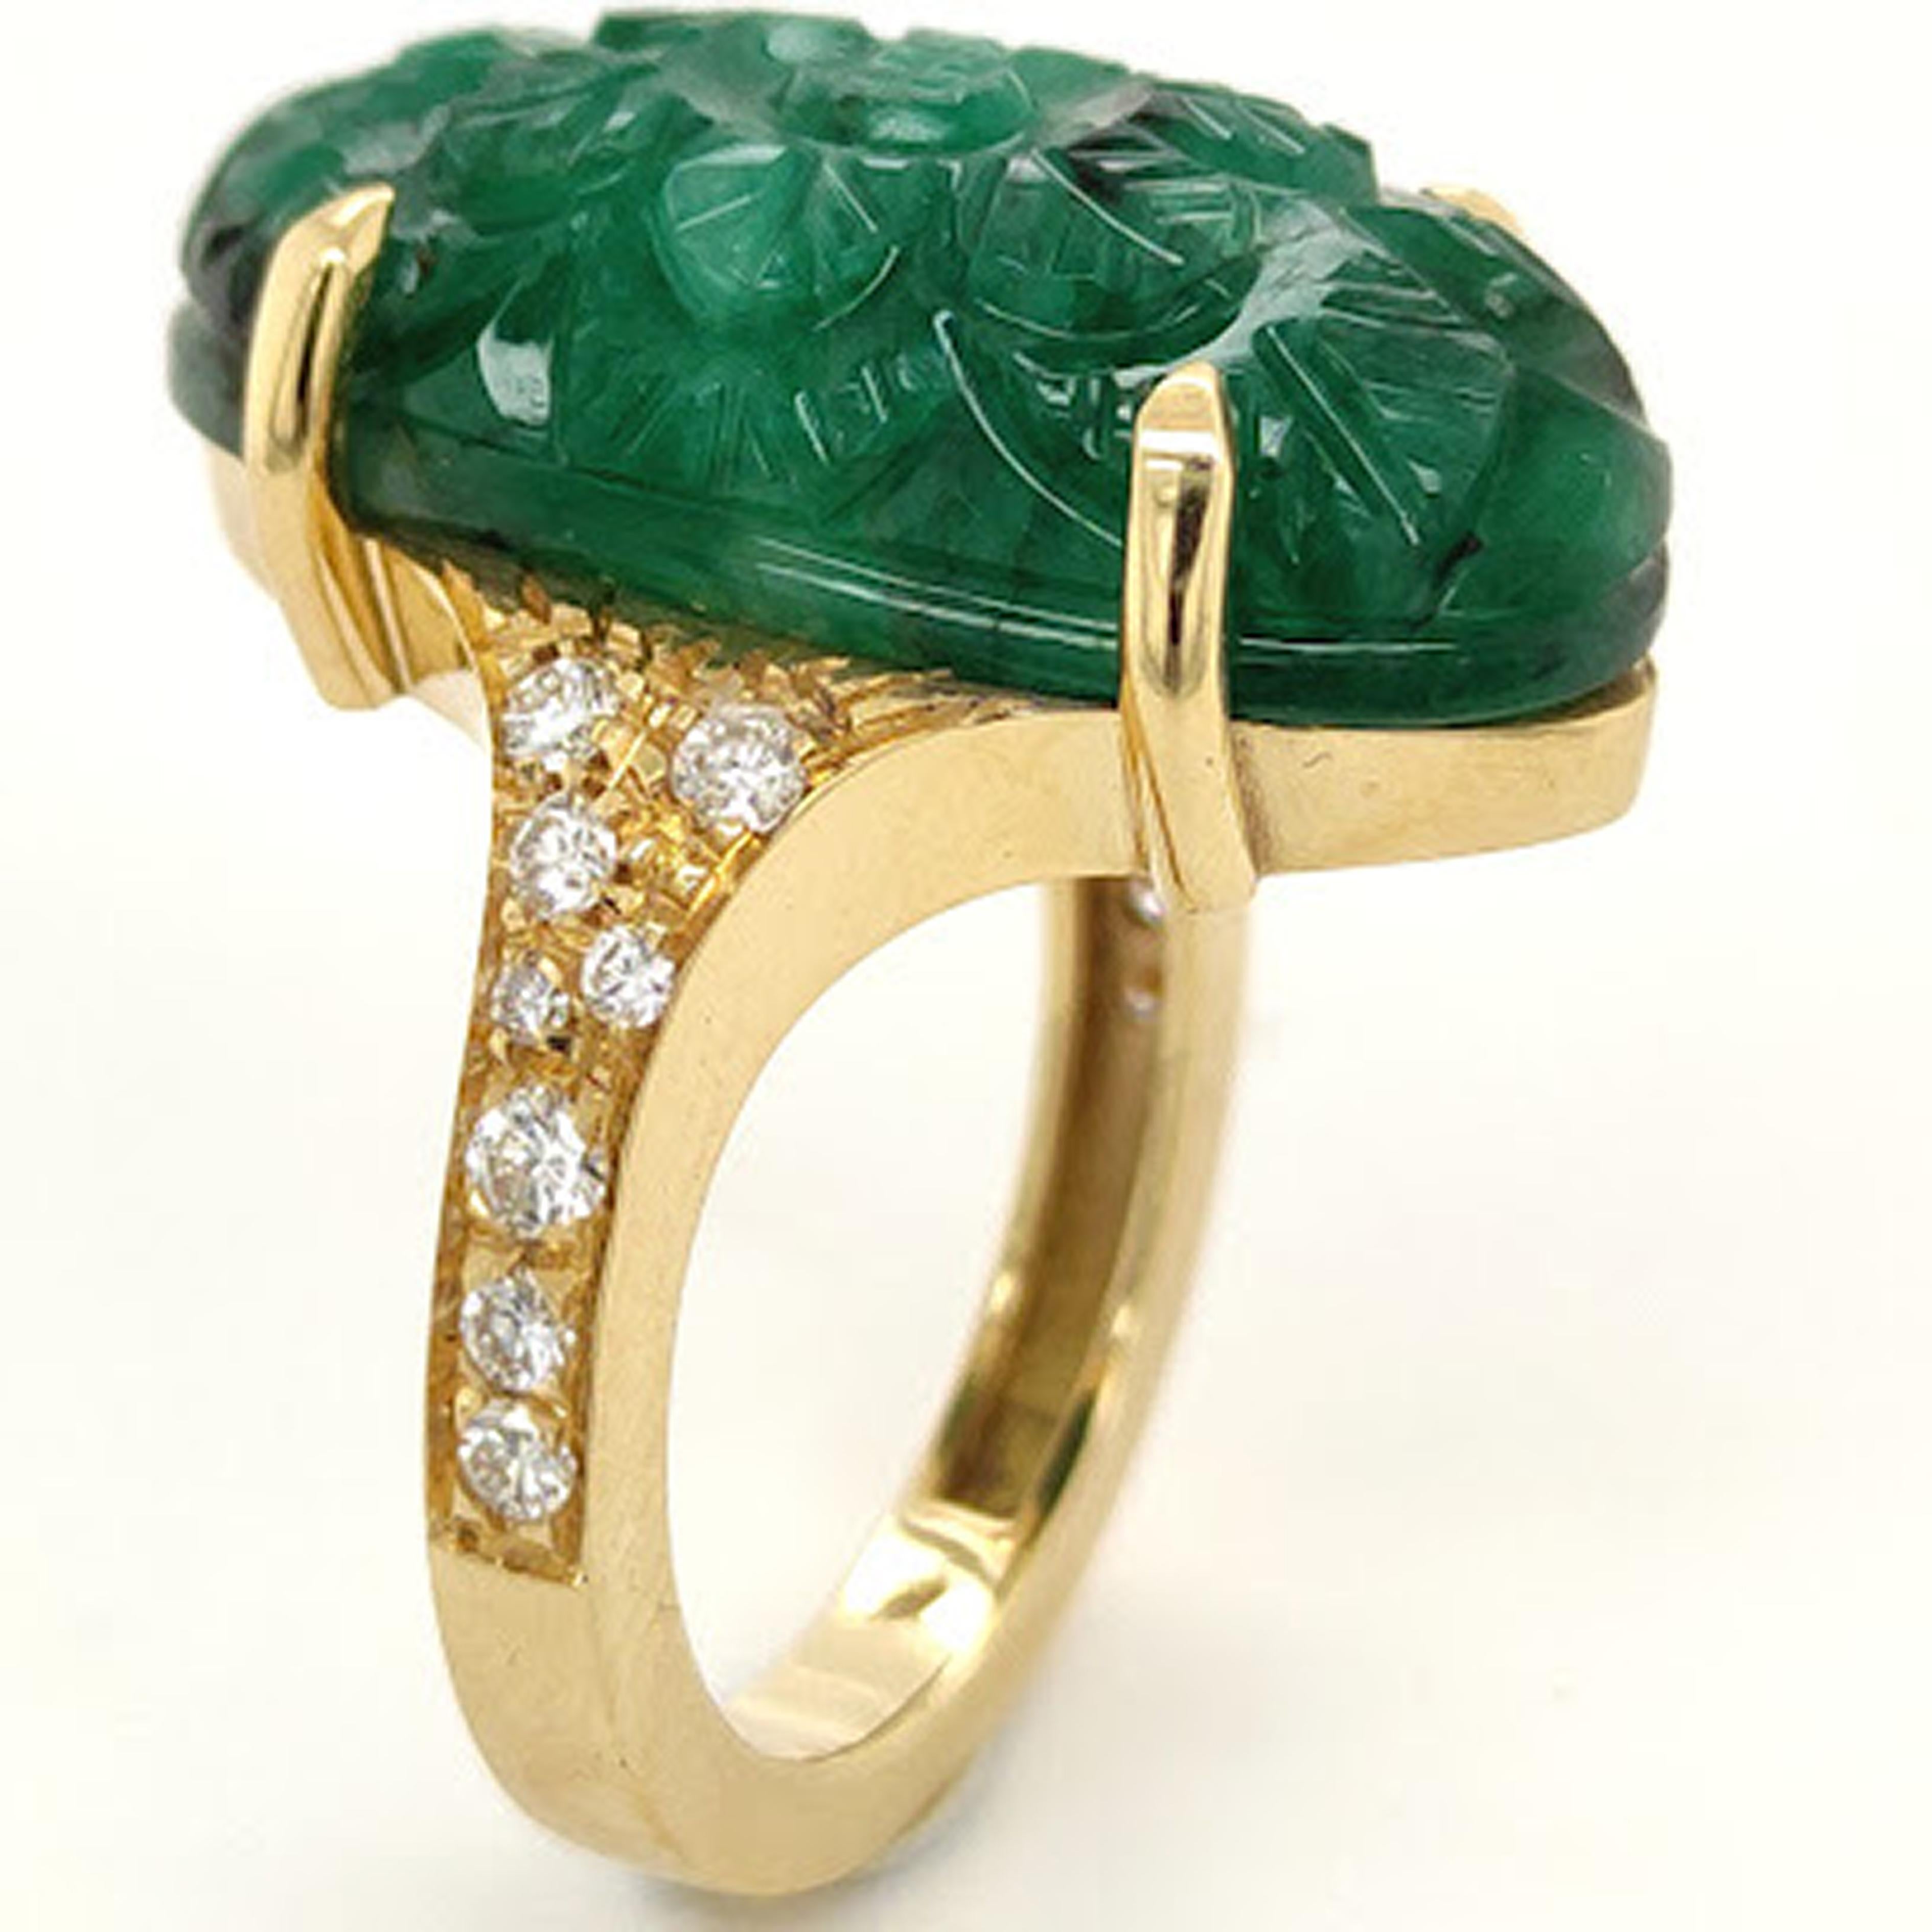 One-of-a-kind, Contemporary, Unique yet Chic Cocktail Ring Featuring a 16.38 Carat Natural Hand Engraved Emerald Cabochon (0.942x0.480in) in a 0.60Kt Top Quality White Diamond Setting.
The color-changing of the Emerald cabochon combined with White